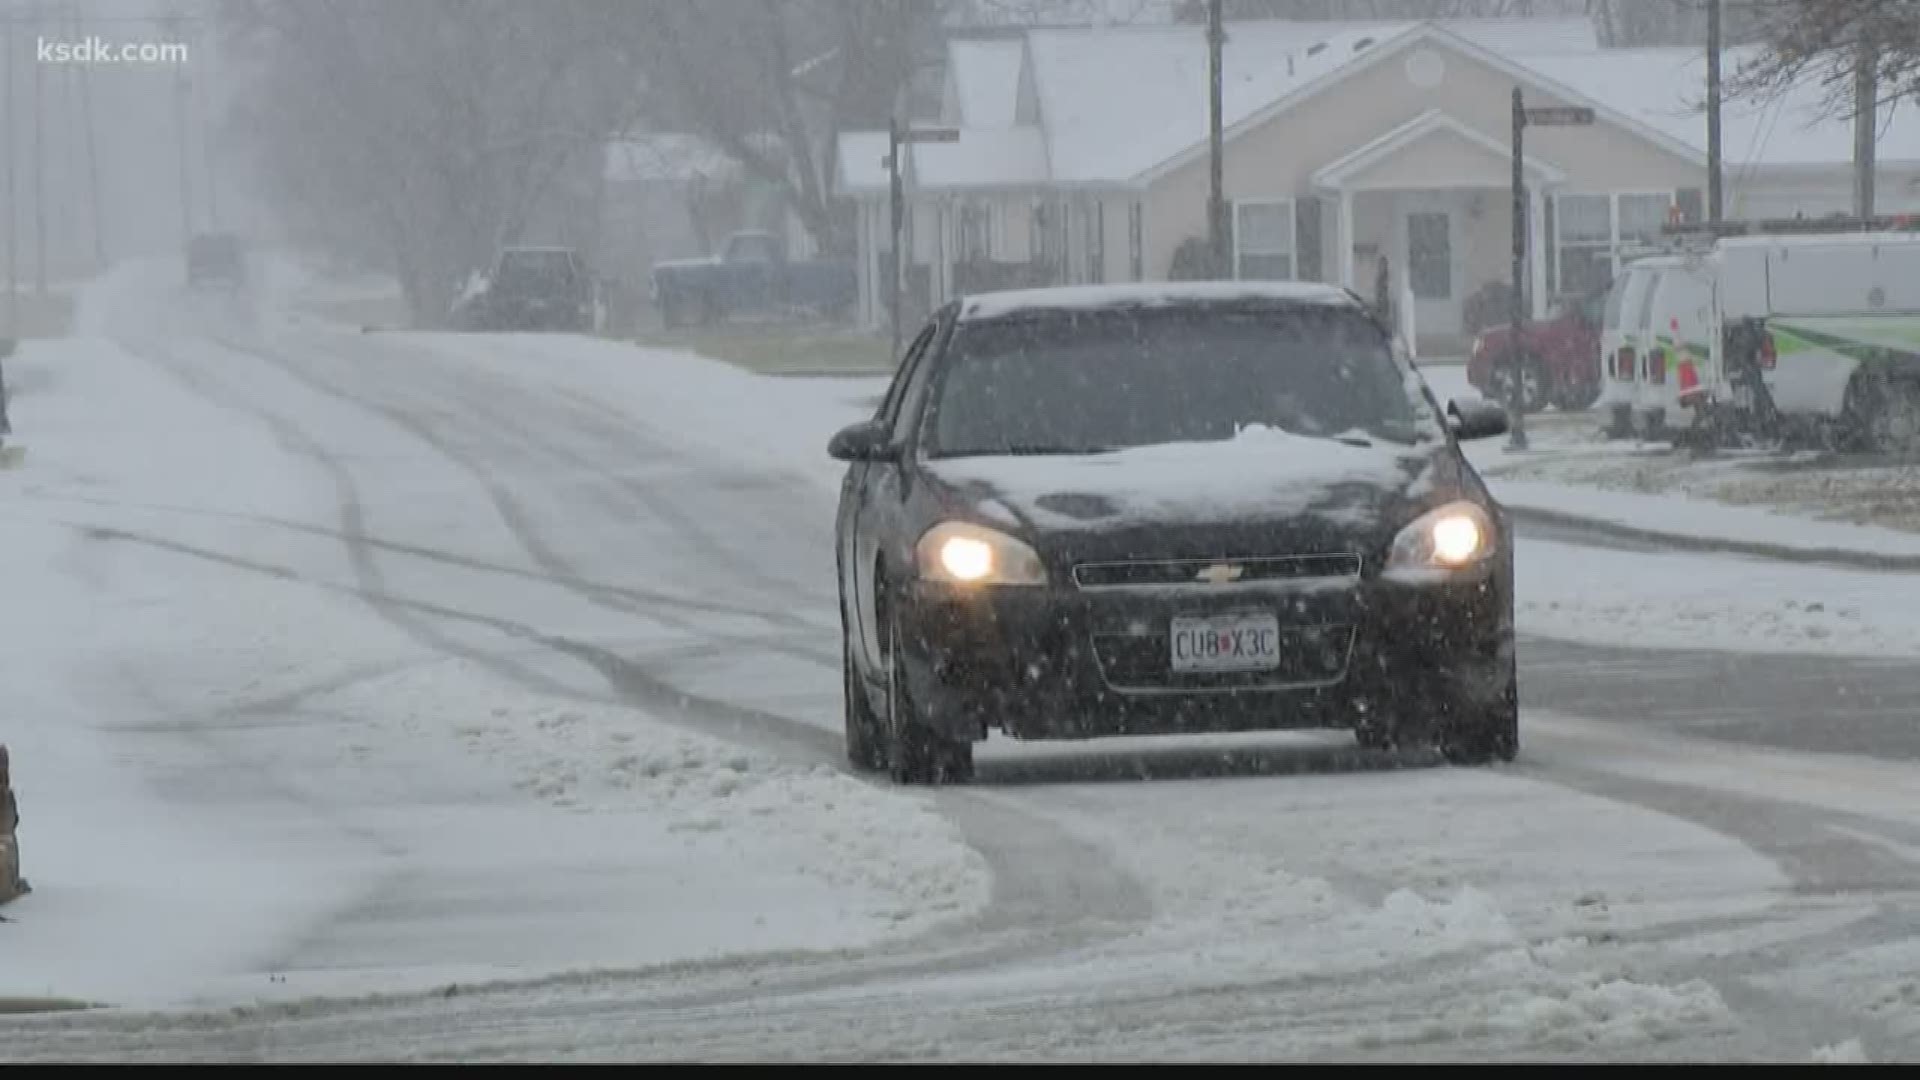 On Wednesday night, the roads were just wet, but MoDOT is not letting its guard down.